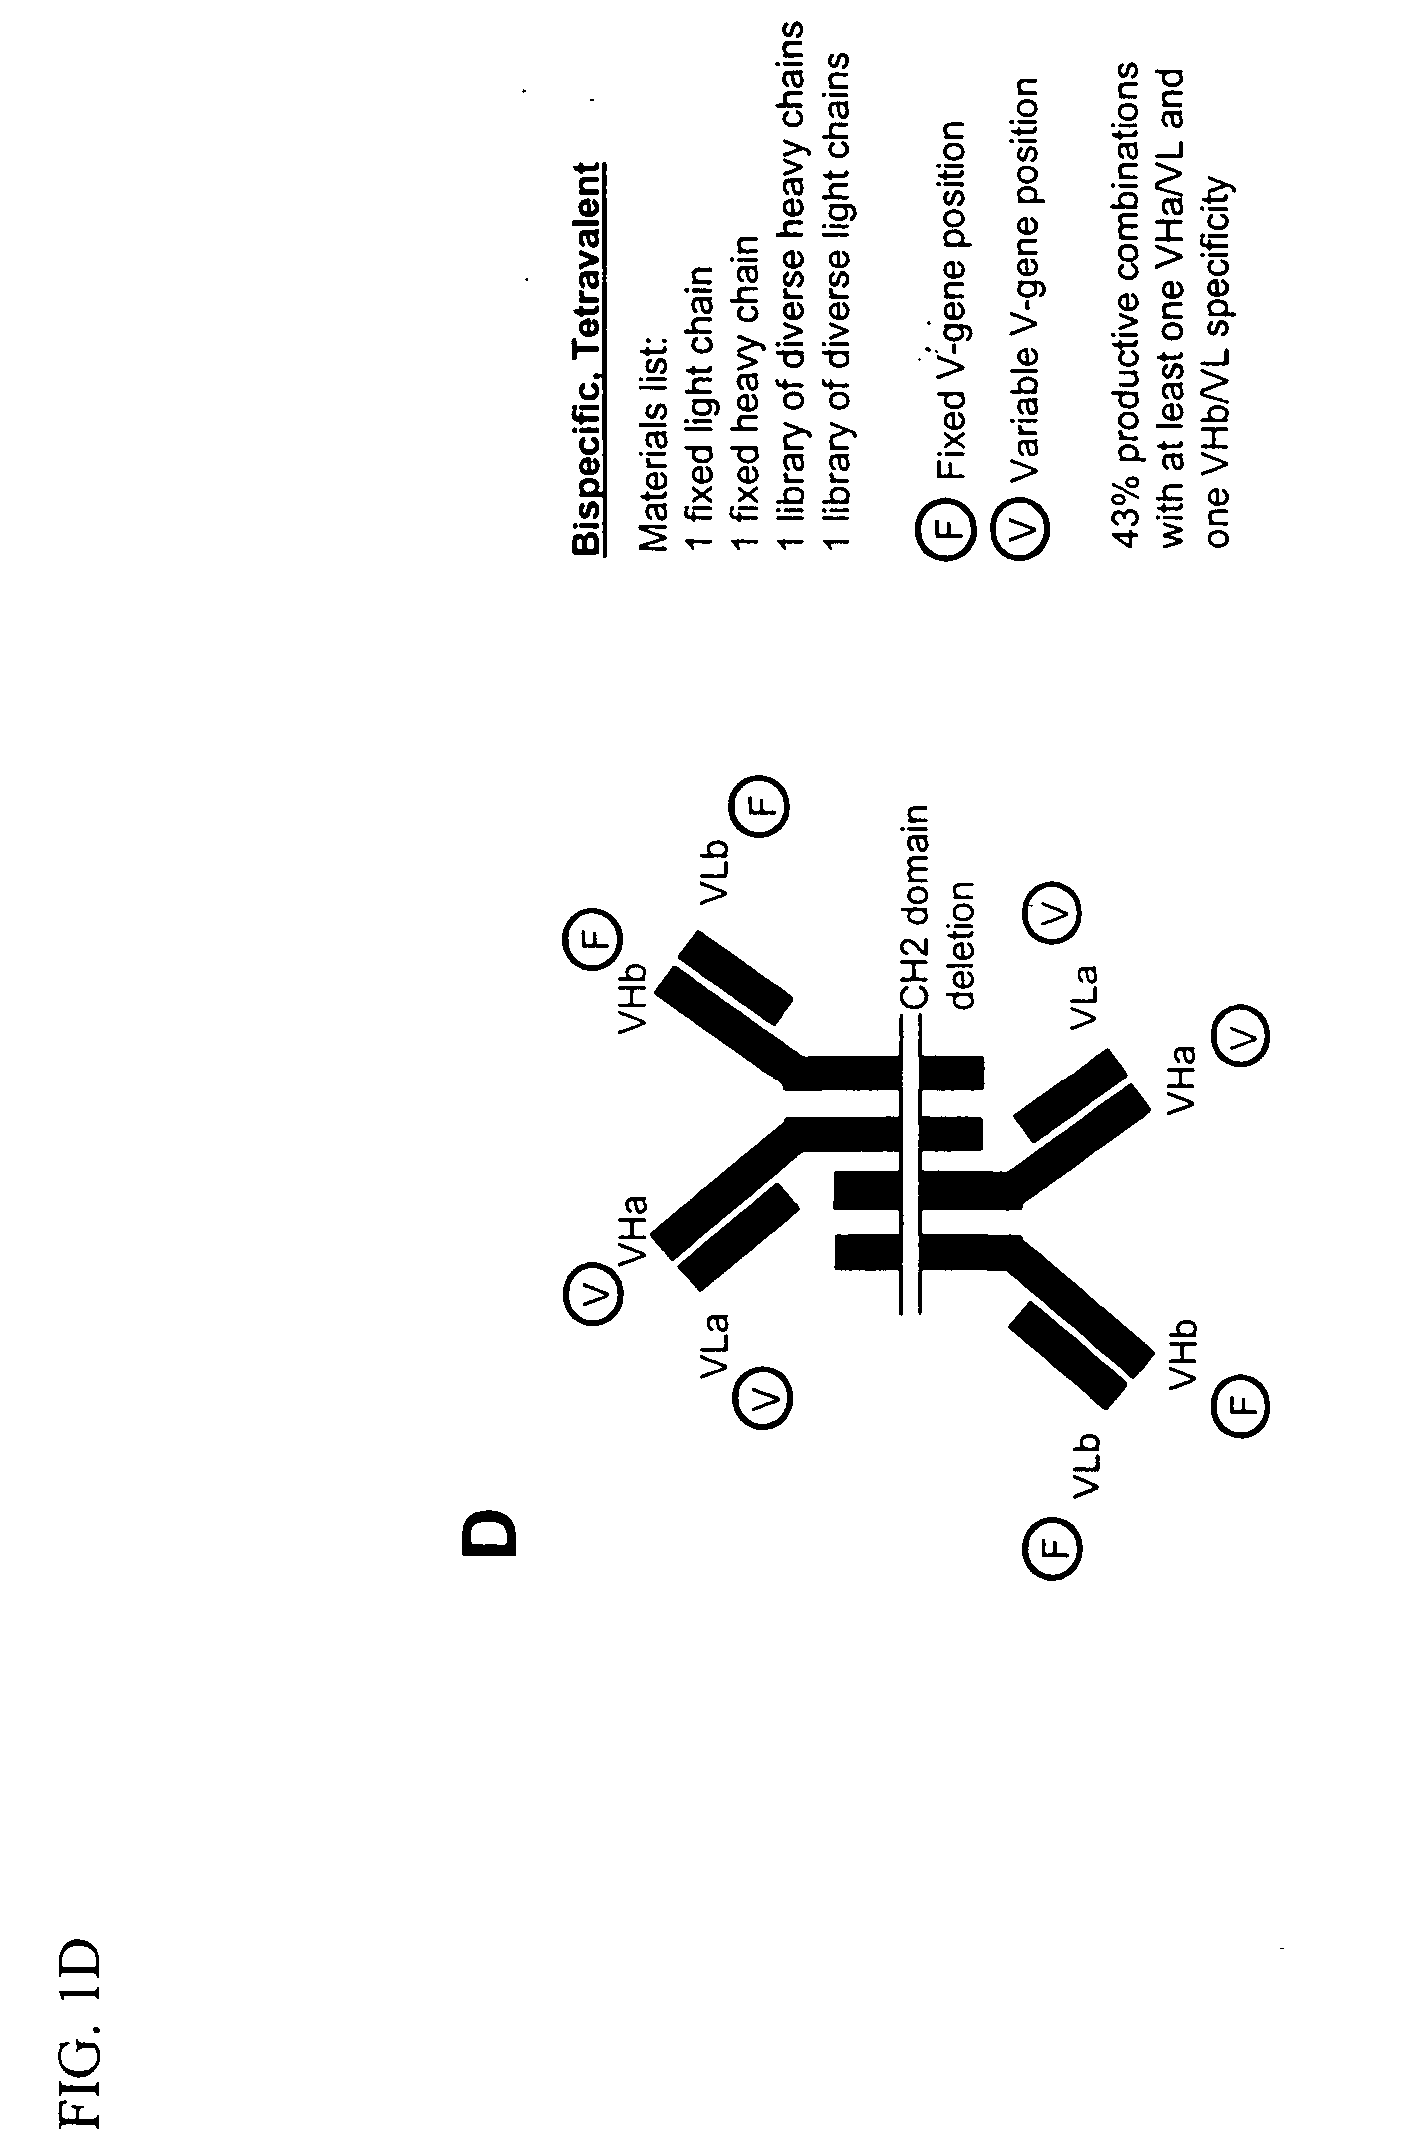 Methods for producing and identifying multispecific antibodies